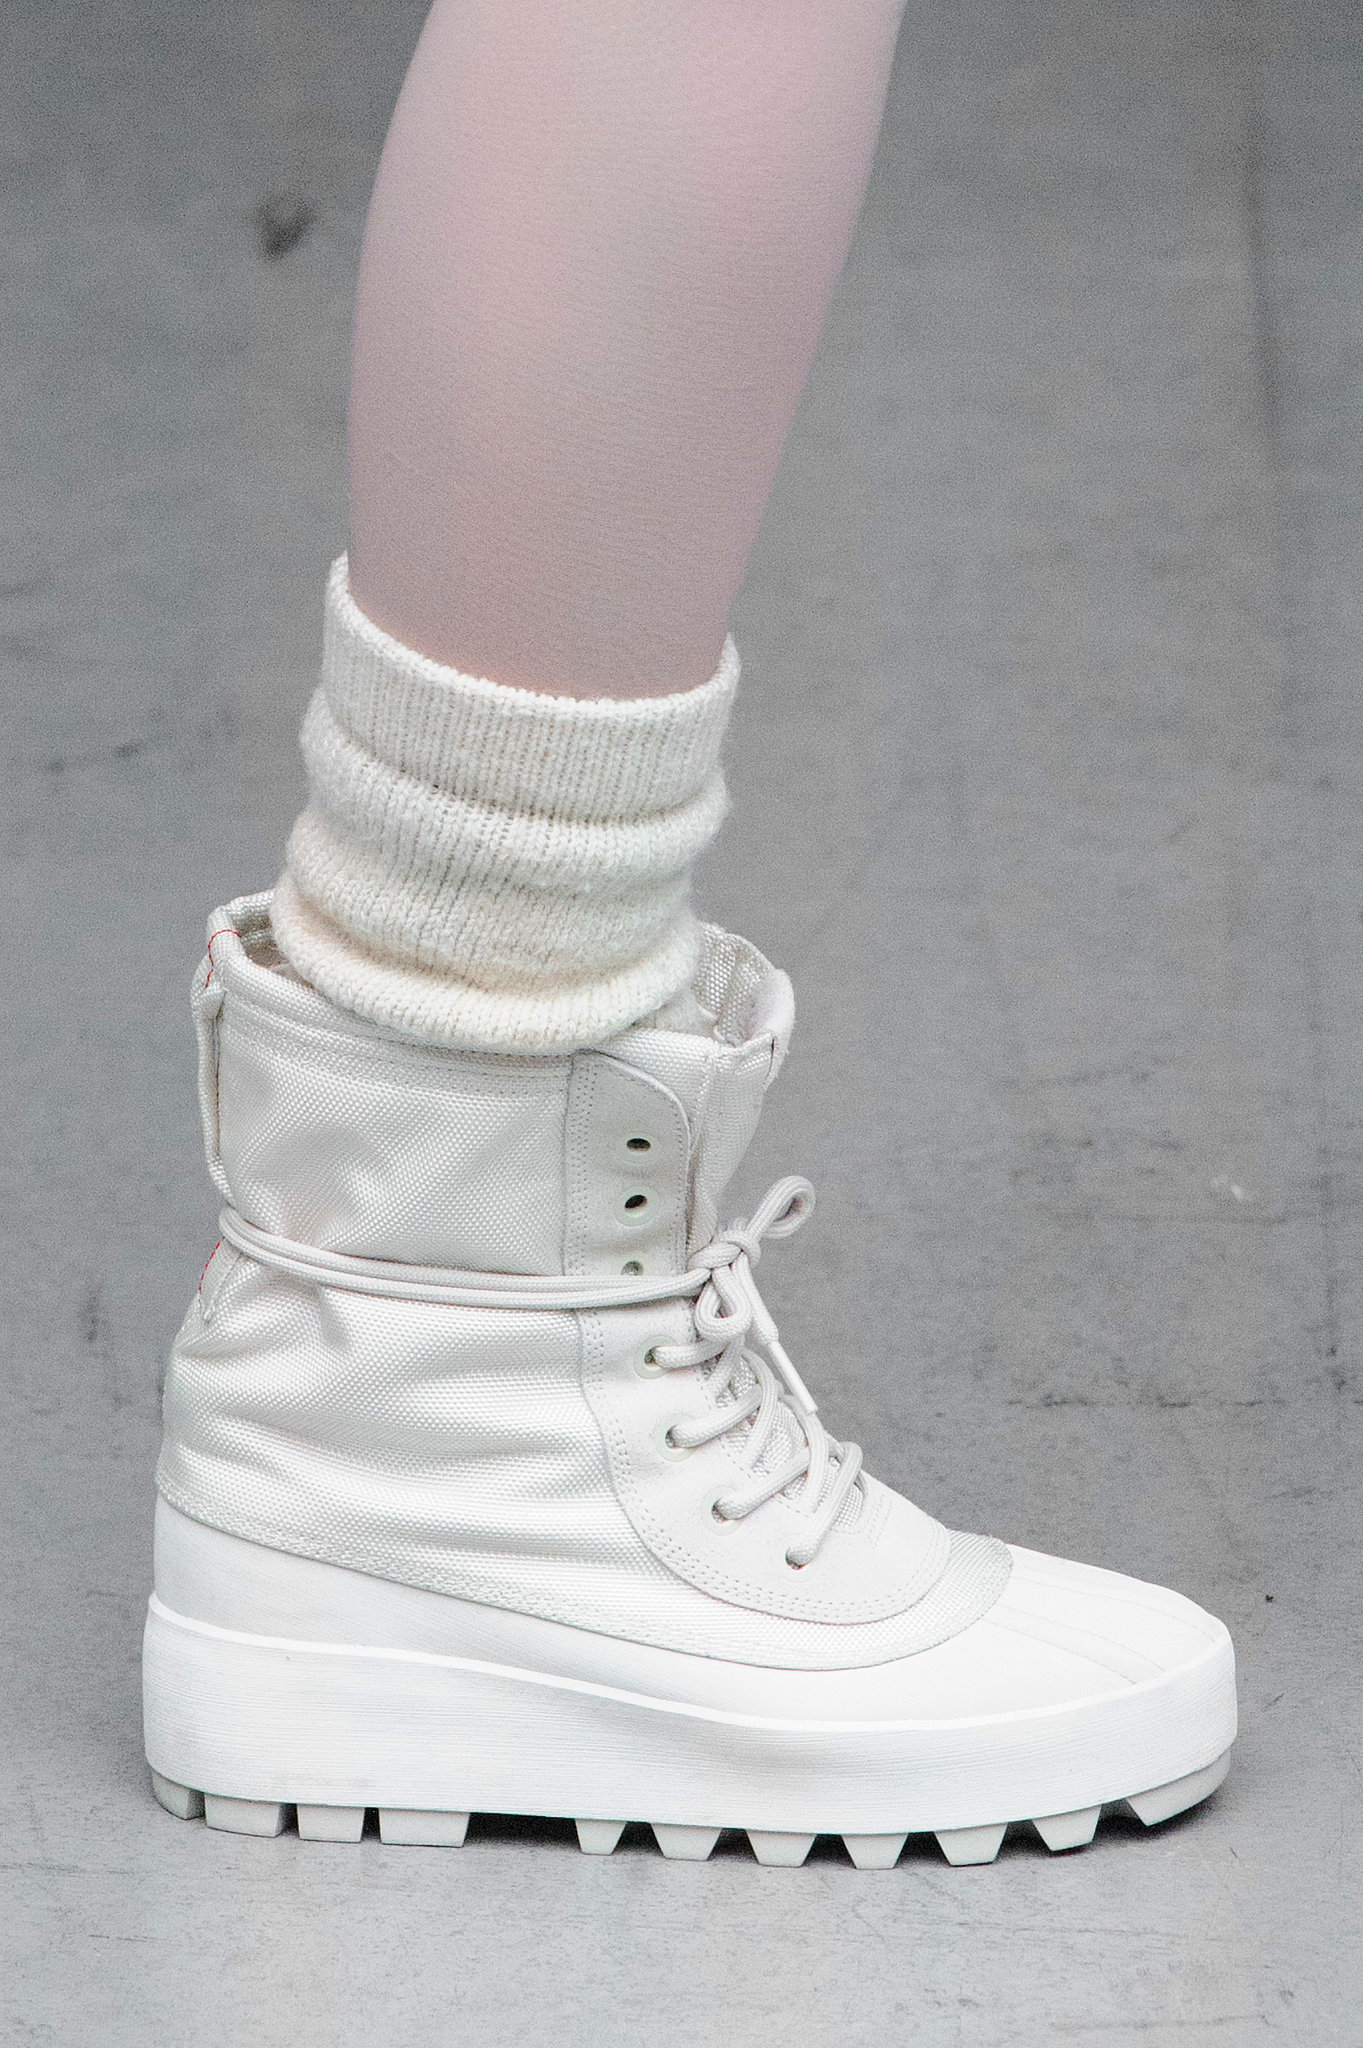 Kanye West x Adidas Fall 2015 | The Best Shoes to Hit the ...
